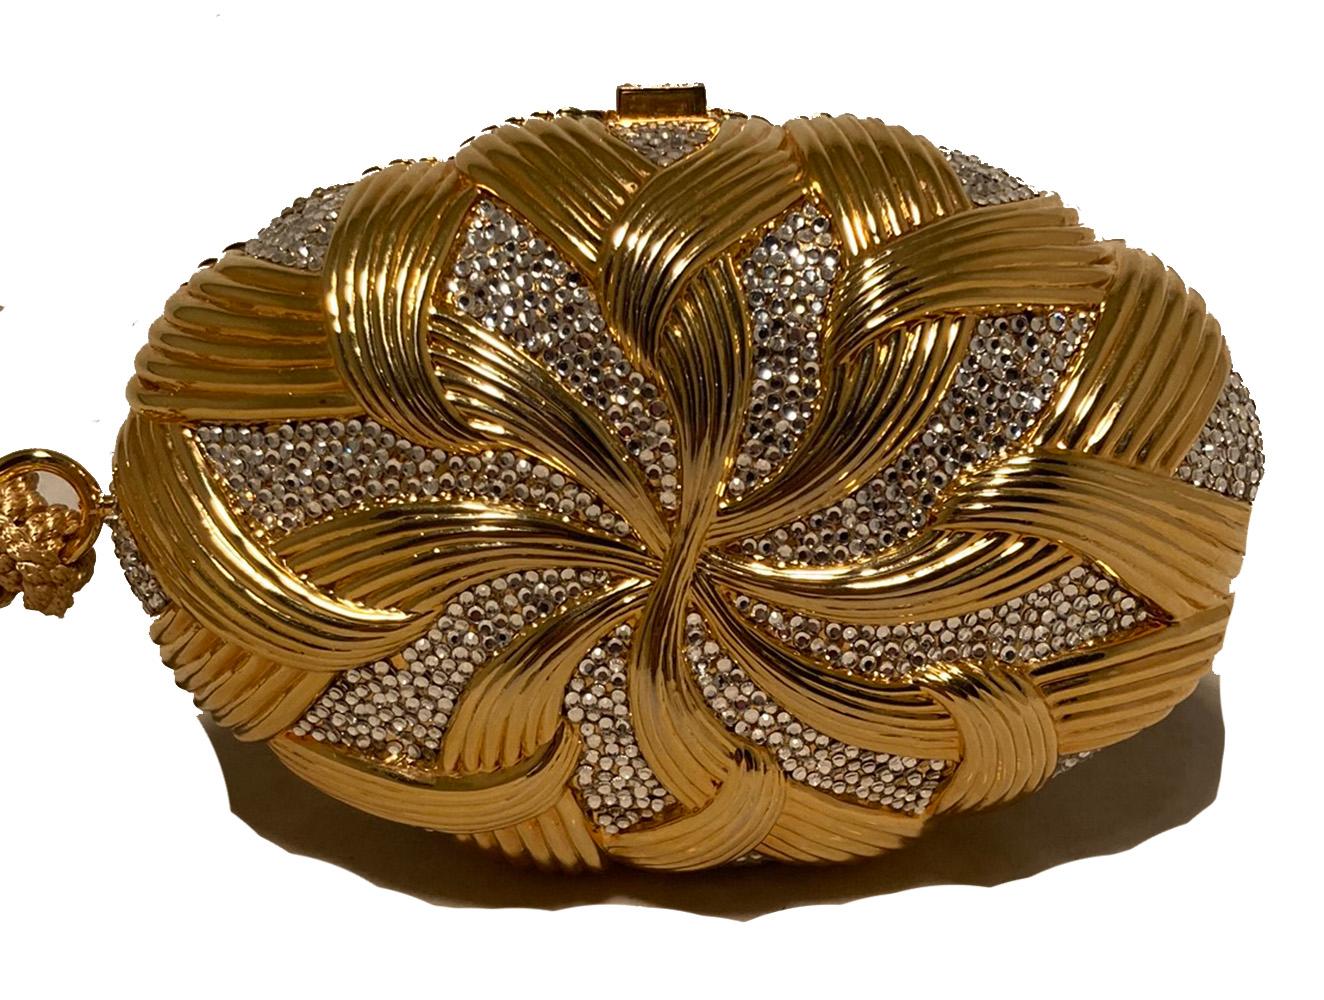 Judith Leiber Gold Basket Weave Oval Minaudiere in excellent condition. Gold basket weave design in an oval shape with clear Swarovski crystals throughout. Button closure opens to a gold leather interior with attached gold chain shoulder strap. Gold